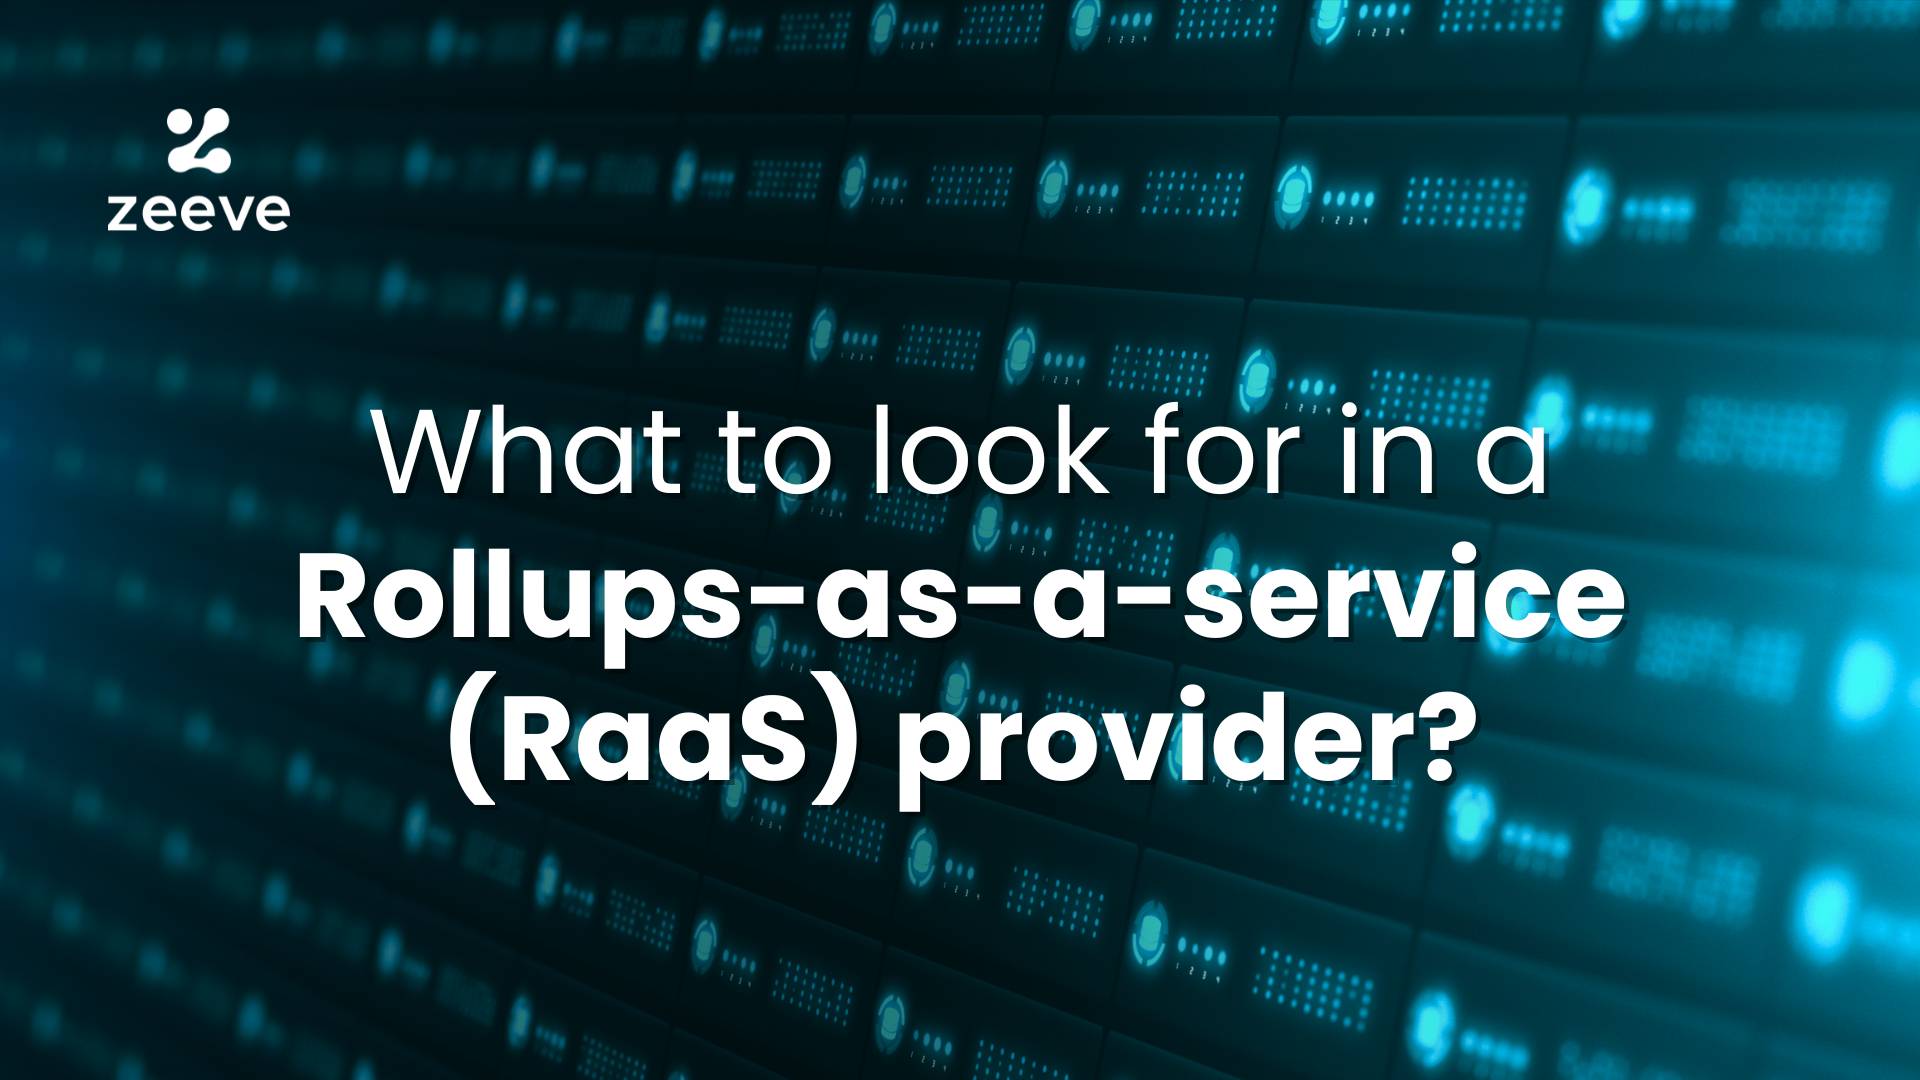 Rollups-as-a-service (RaaS) provider